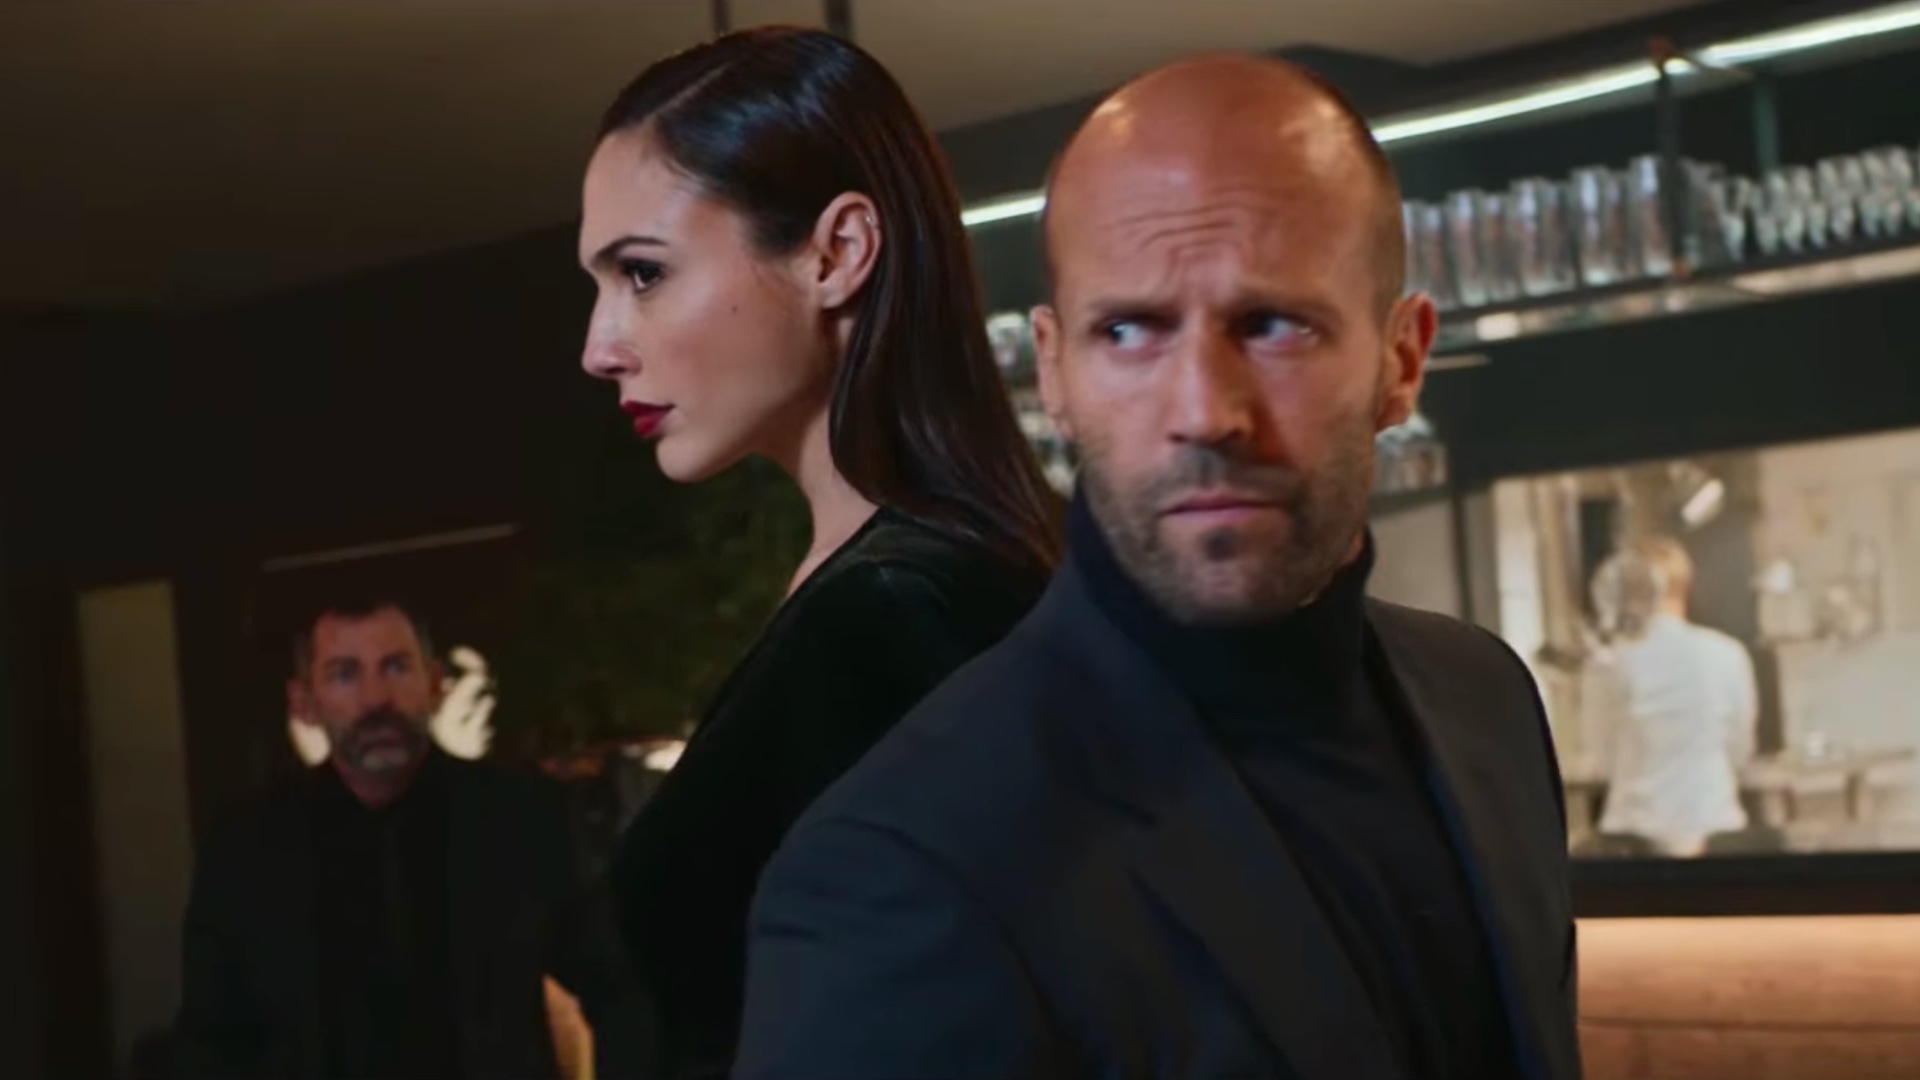 Jason Statham And Gal Gadot Kick Major Ass In Action Packed Wix Super Bowl Commercial Geektyrant Thanks to a recent revlon endorsement and her upfront salary for the forthcoming blockbuster, gadot makes the cut for the first time. jason statham and gal gadot kick major